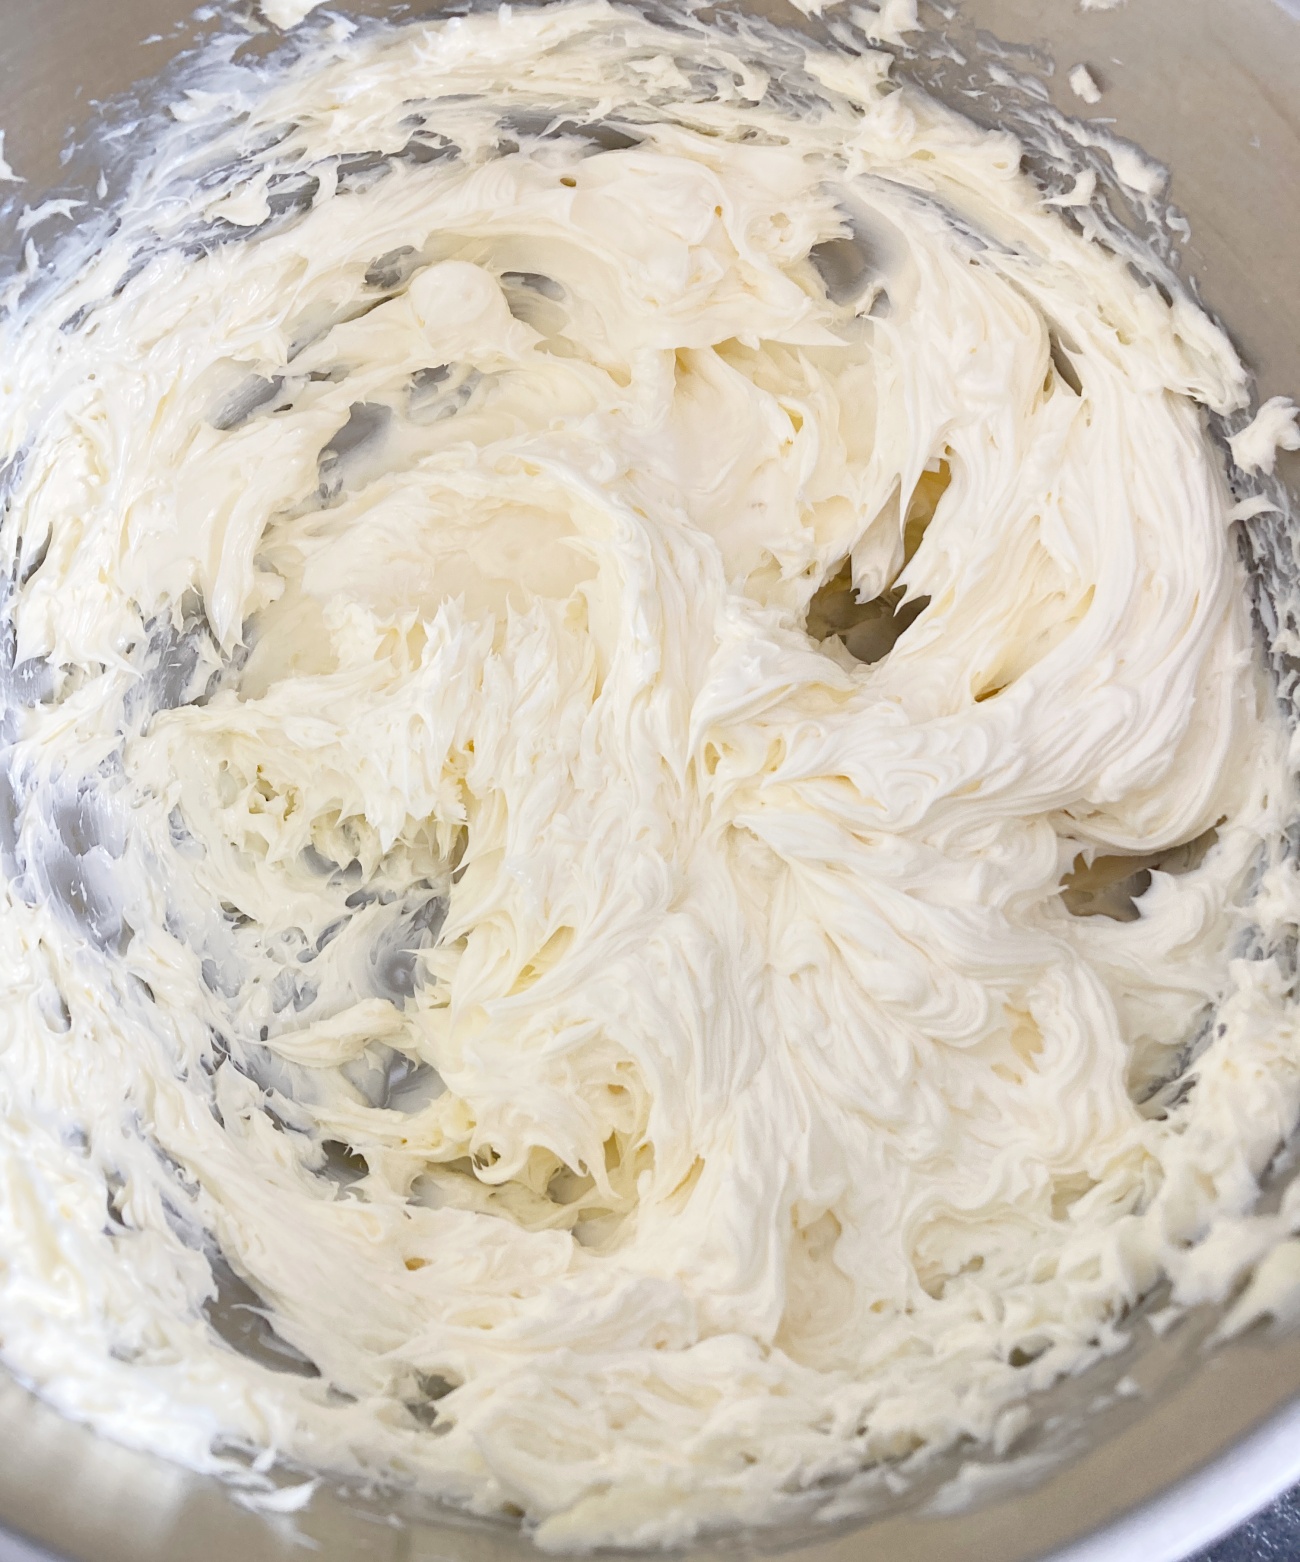 In a large bowl beat butter with electric mixer until light in color, about 5-8 minutes. Add 2 cups powdered sugar and vanilla extract and seeds to butter. Mix until fully combined. Add remaining sugar and cream and beat again until fluffy.